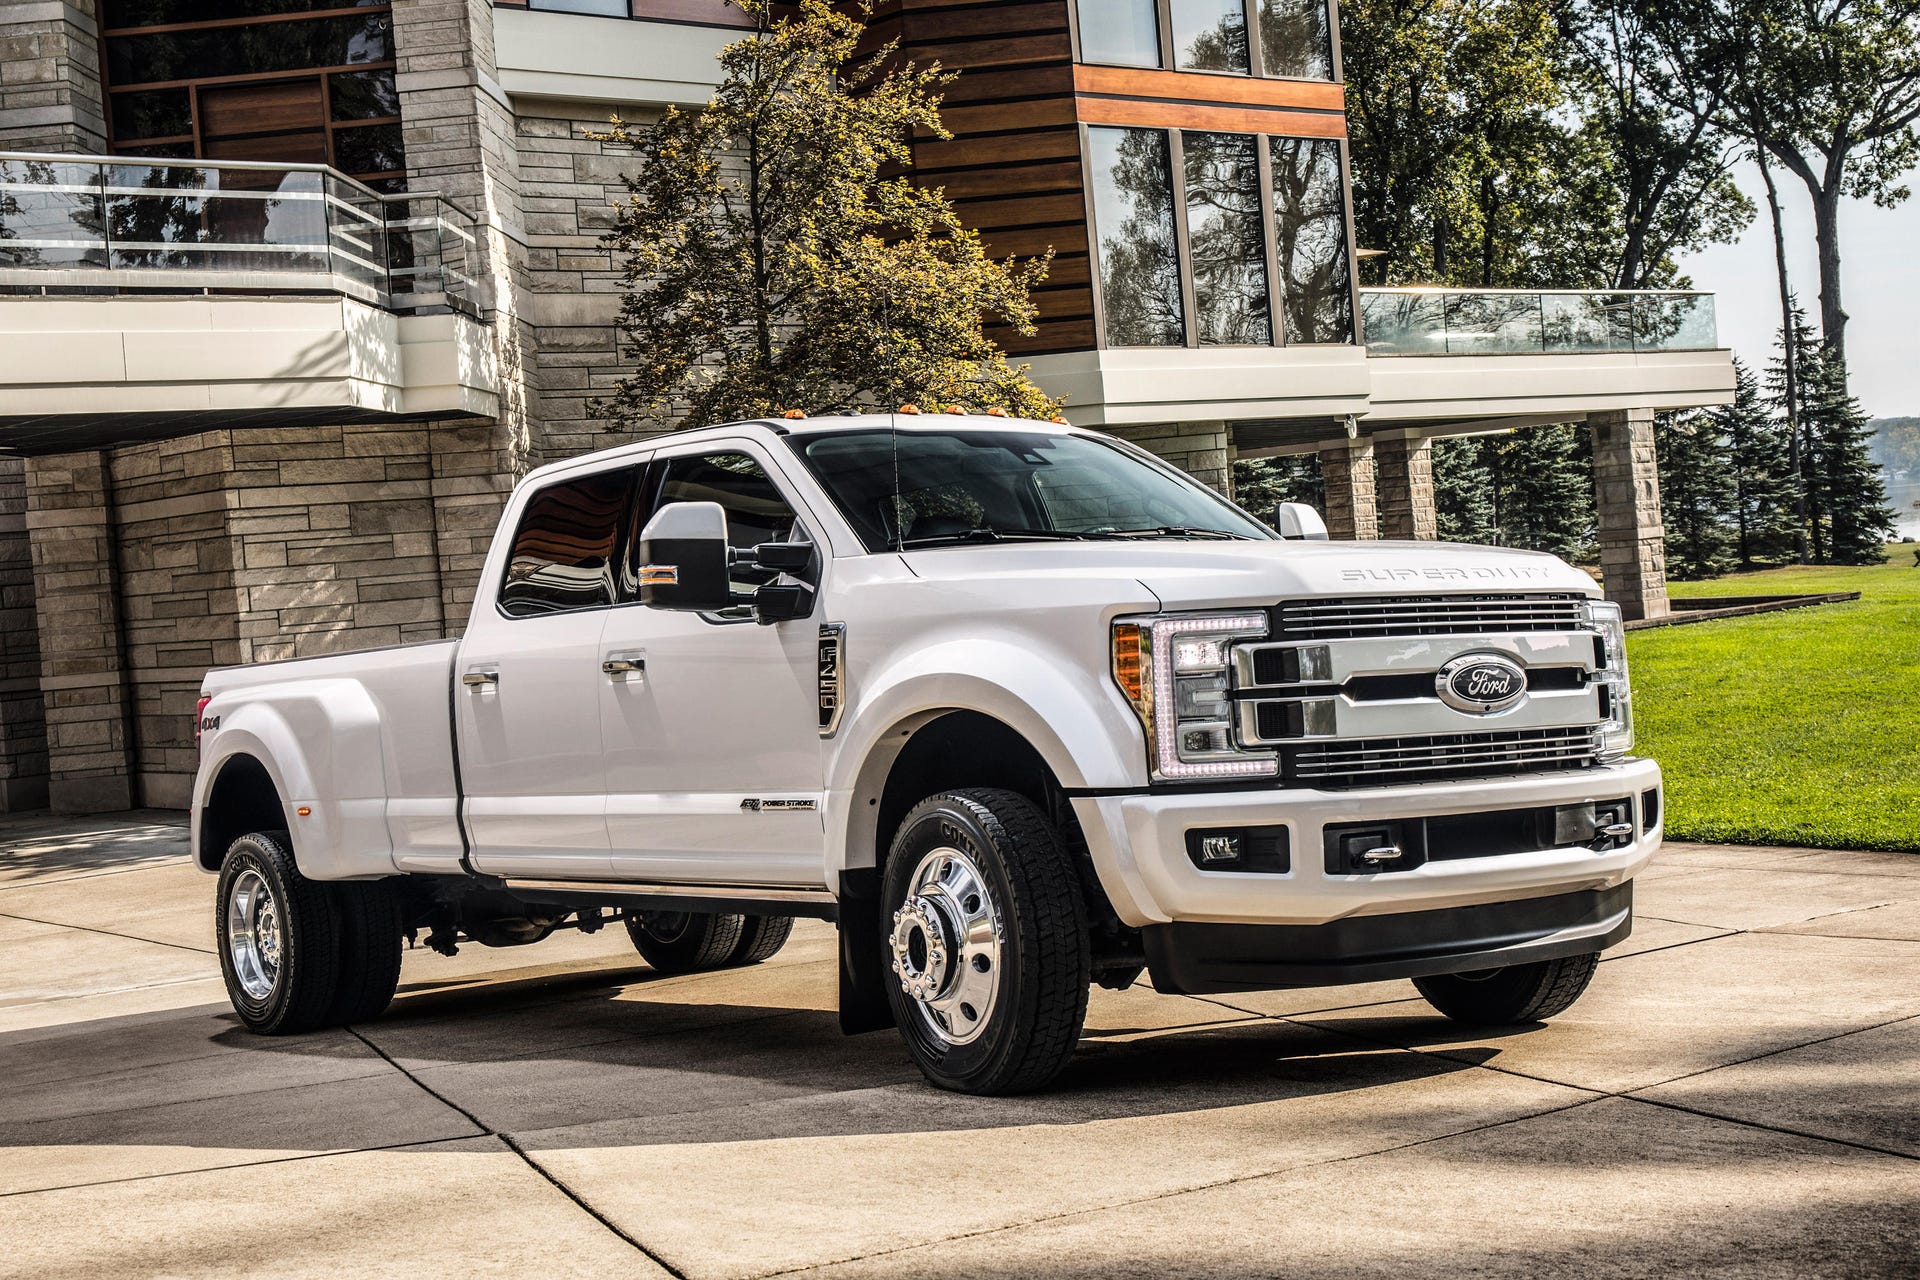 pickup $100,000 that jet a CNET can - luxury a apartment truck Ford\'s tow is